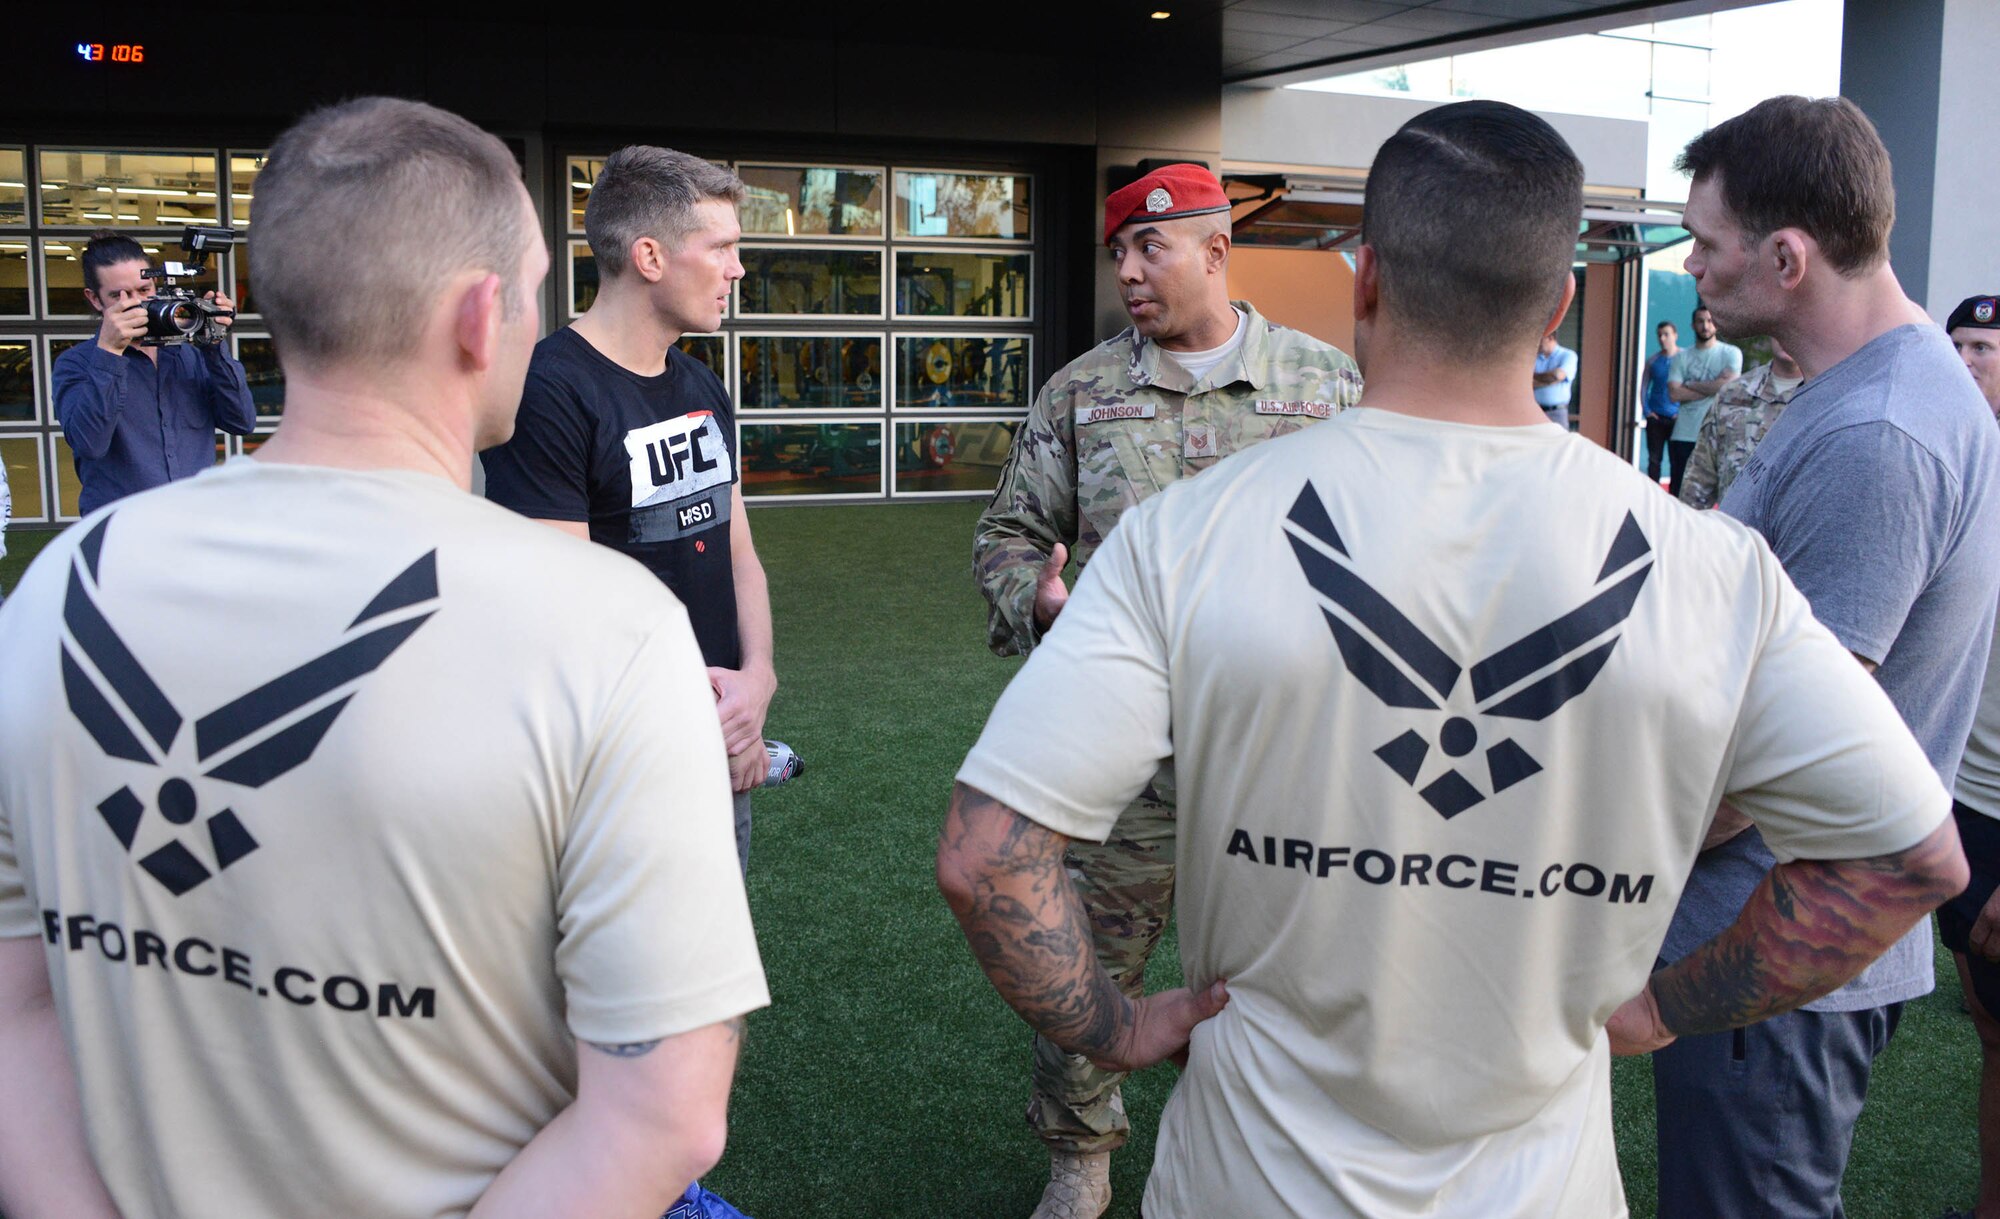 Tech. Sgt. Will Johnson, 330th Recruiting Squadron, gives instructions on how to perform special warfare memorial push-ups to Ultimate Fighting Championship fighters Forrest Griffin and Stephen Thompson during a production at the UFC Performance Institute in Las Vegas,